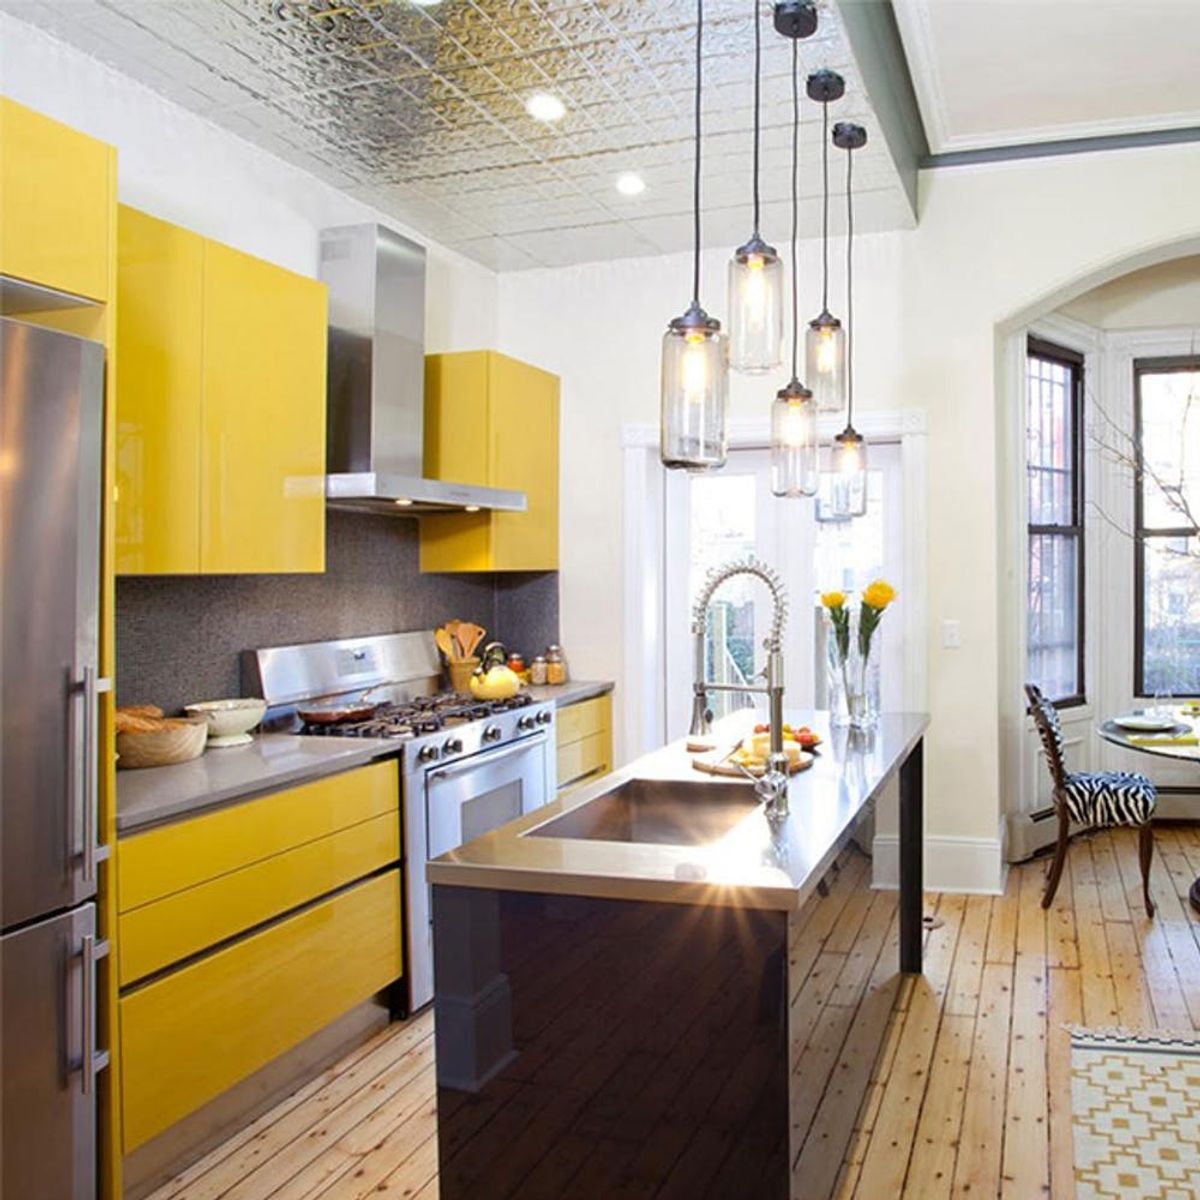 11 Home Renovations That Will Make You Want to Remodel STAT